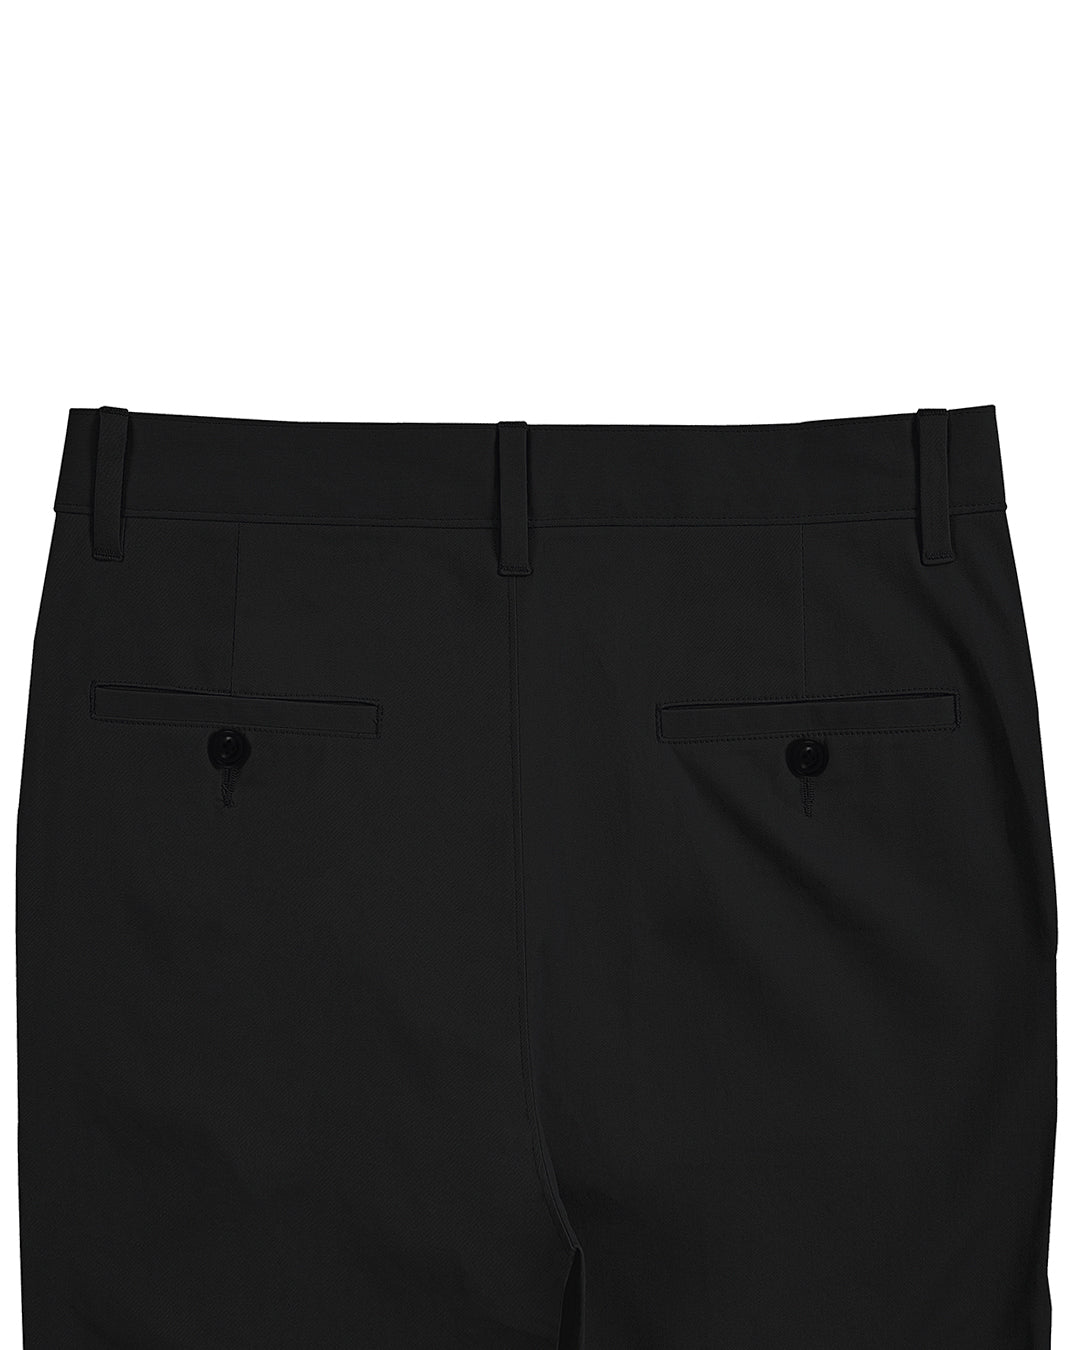 Back view of custom Genoa Chino pants for men by Luxire in black